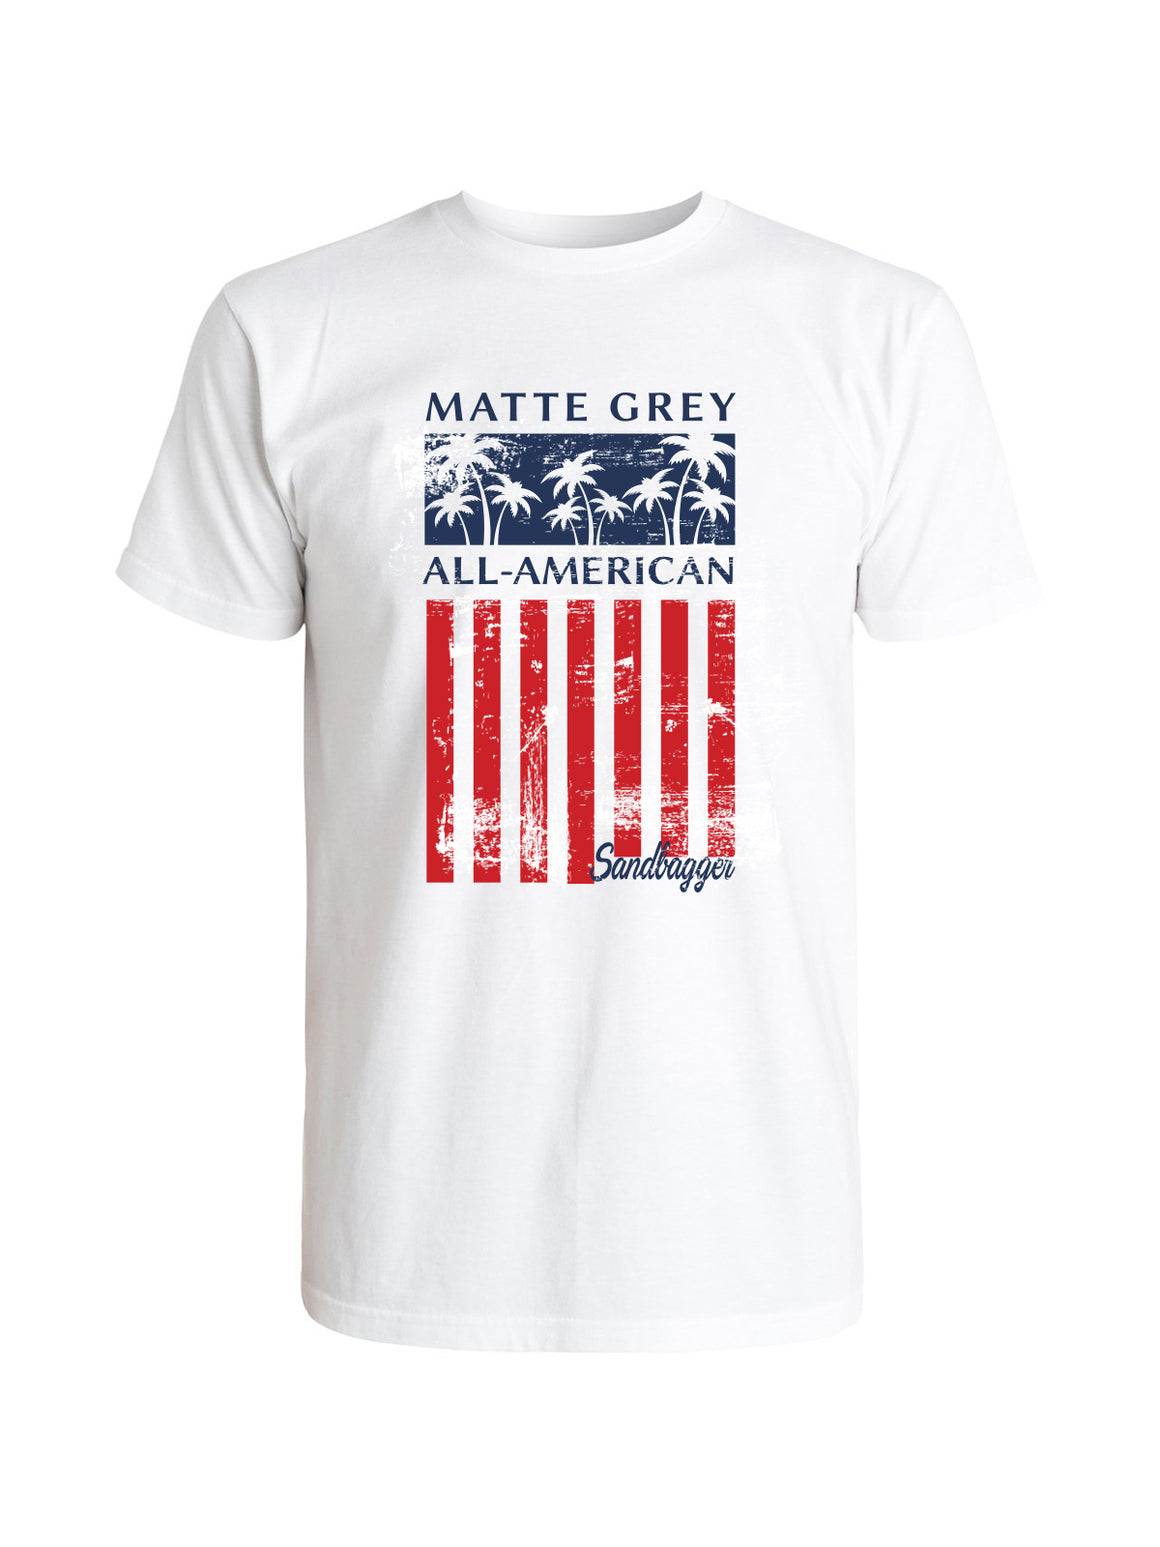 All American Sandbagger Palm Tee -  White (Freedom Red/Space Blue)